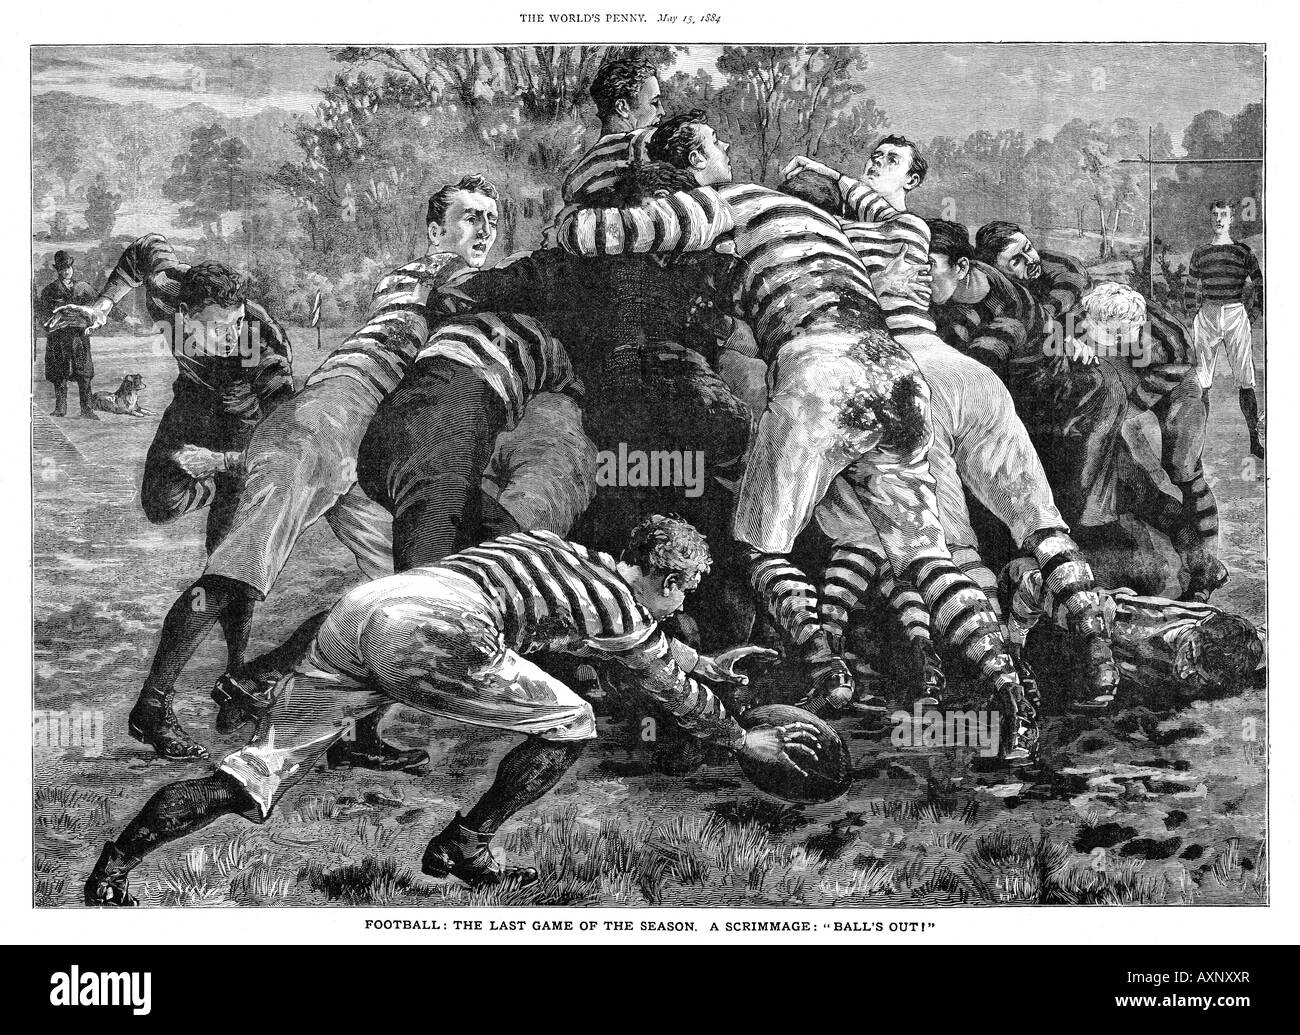 The Last Game Of The Season 1884 engraving of the ball emerging from a scrimmage at rugby football Stock Photo